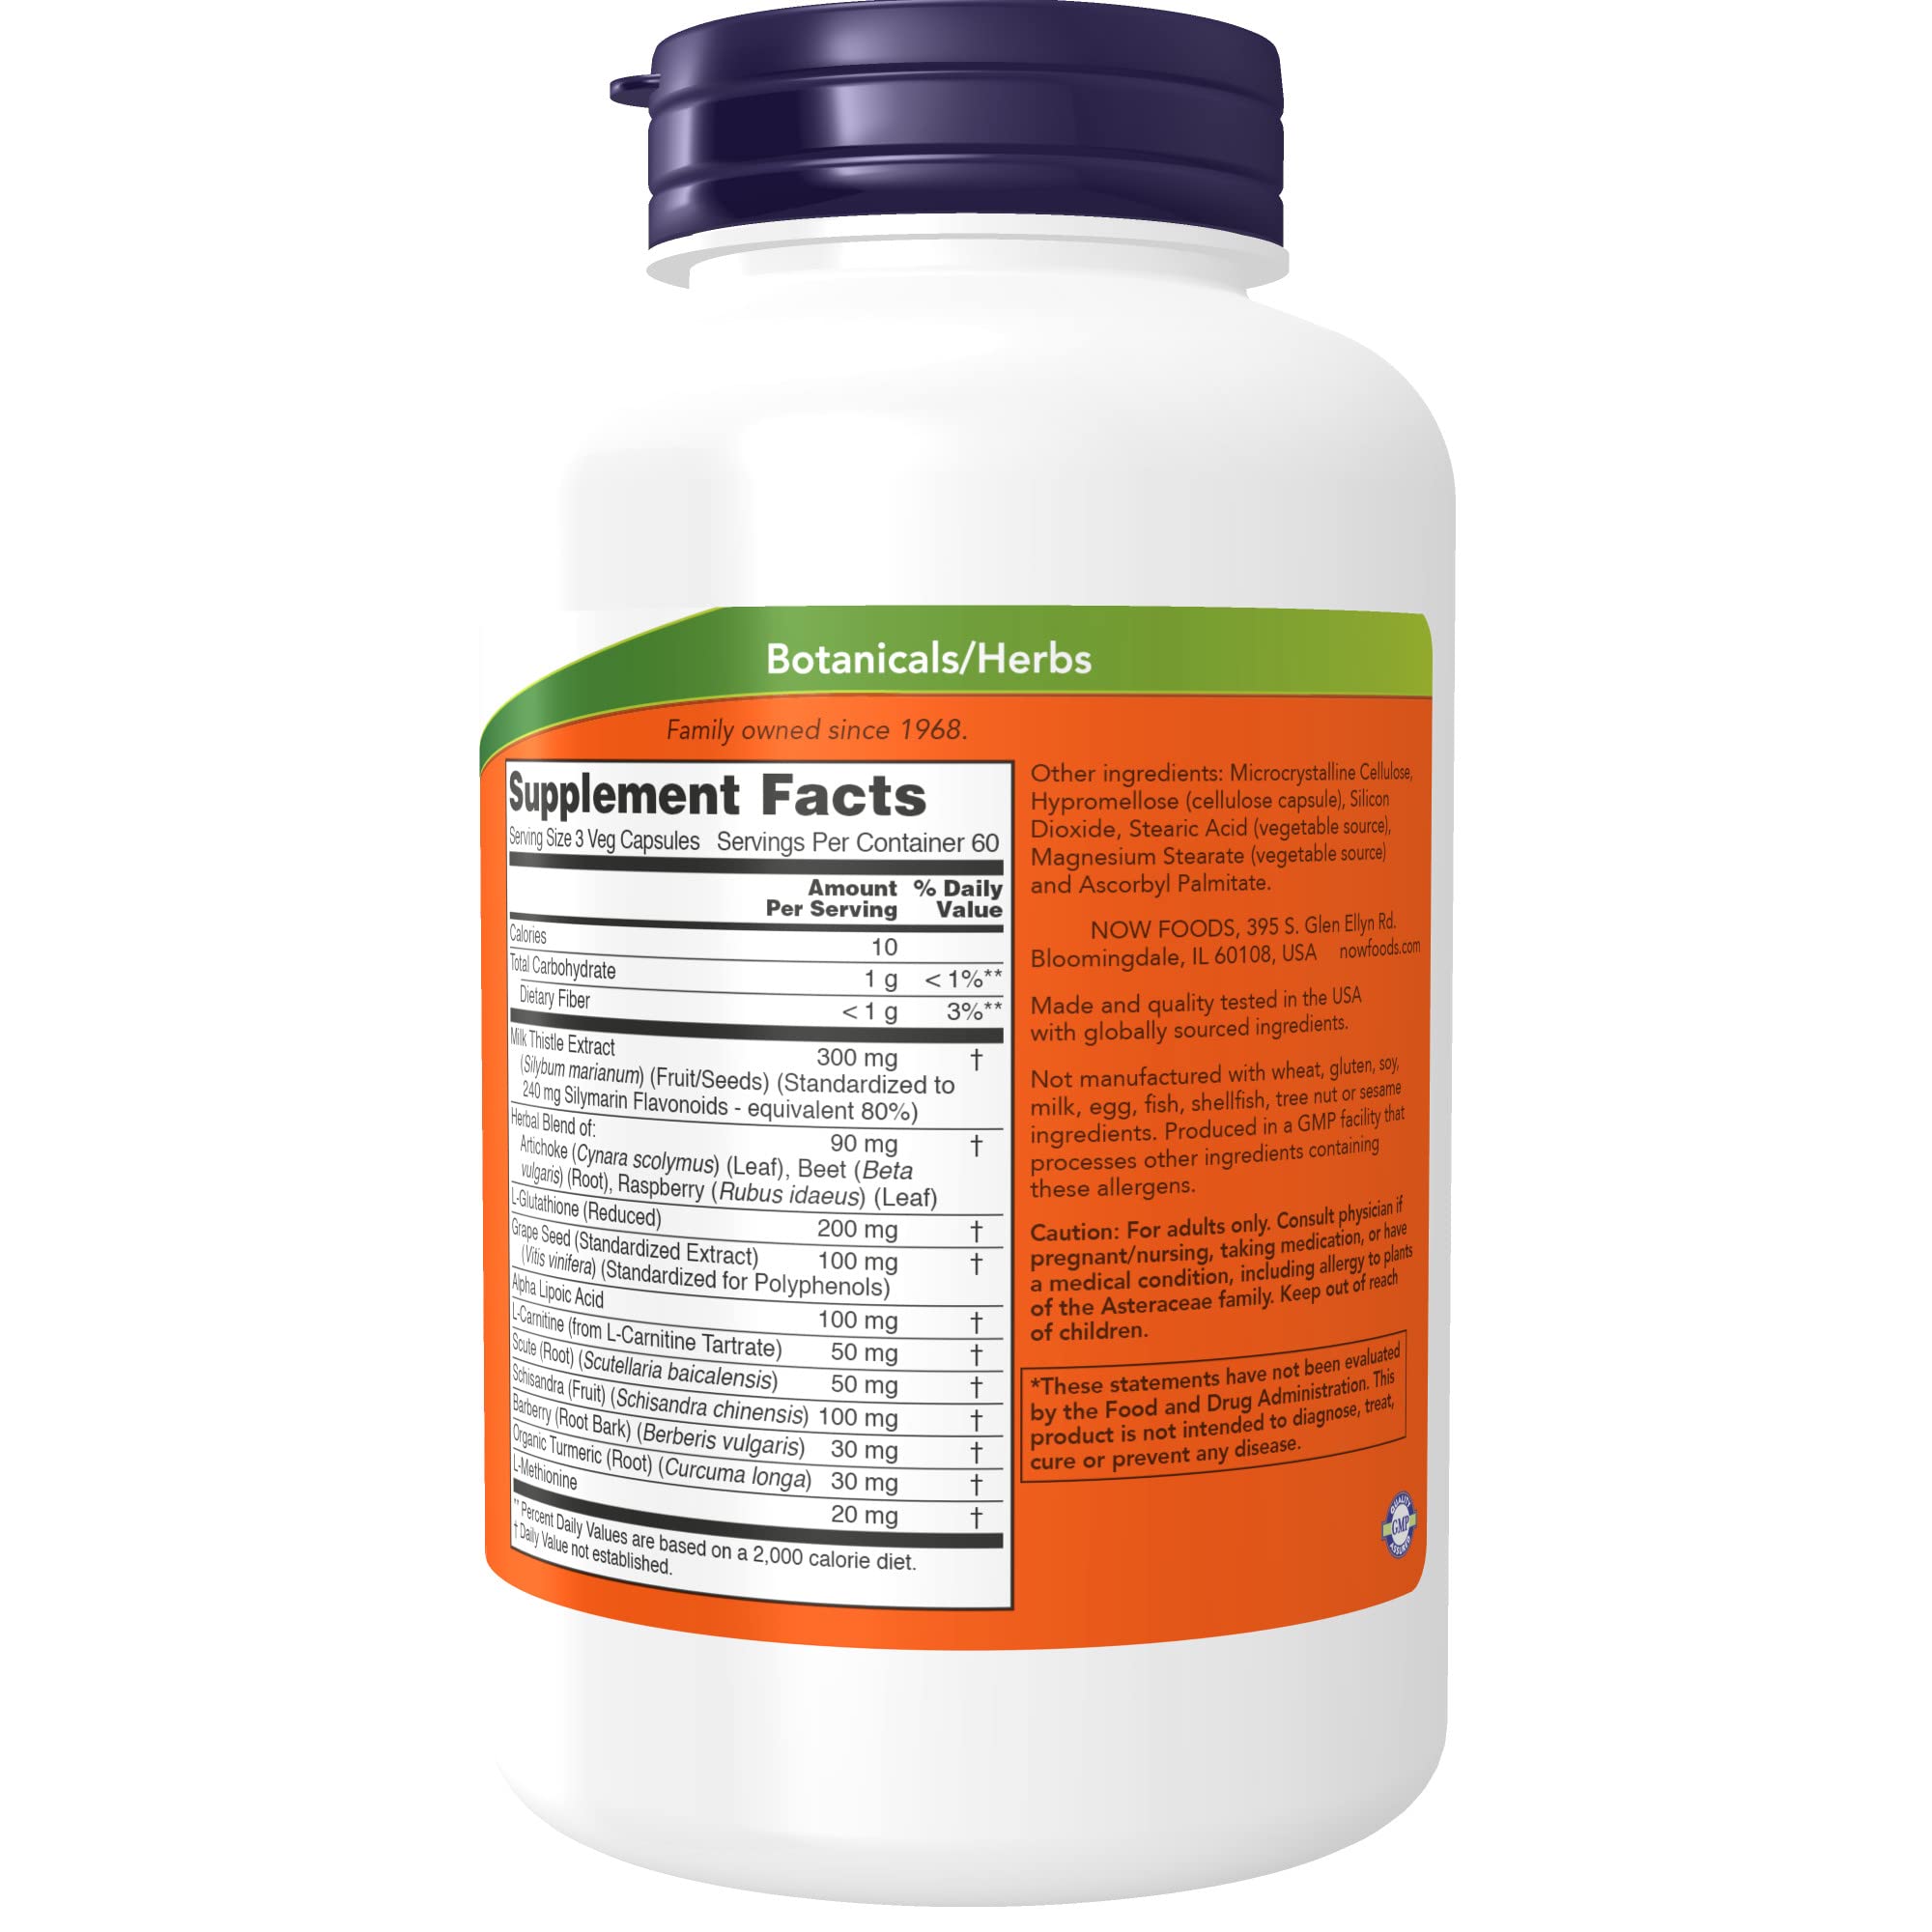 NOW Supplements, Liver Refresh™ with Milk Thistle Extract and unique Herb-Enzyme blend, 180 Veg Capsules